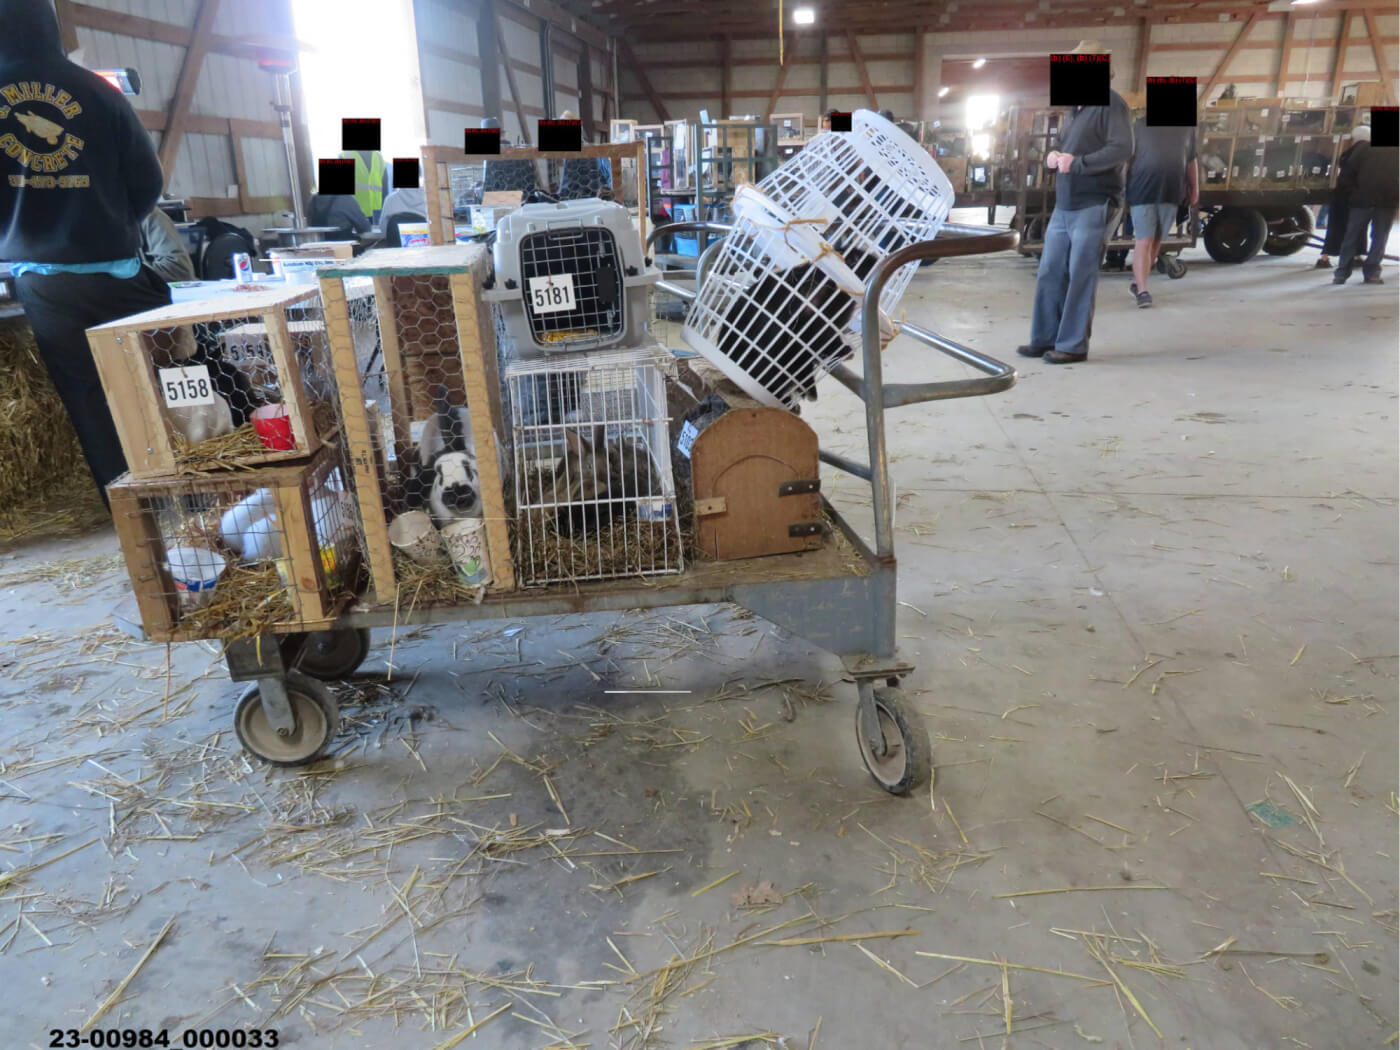 a pushcart in a concrete floored barn with cages, each with a rabbit, stacked on it. some cages are crudely fashioned out of laundry baskets. one cage is tilted and could fall over.